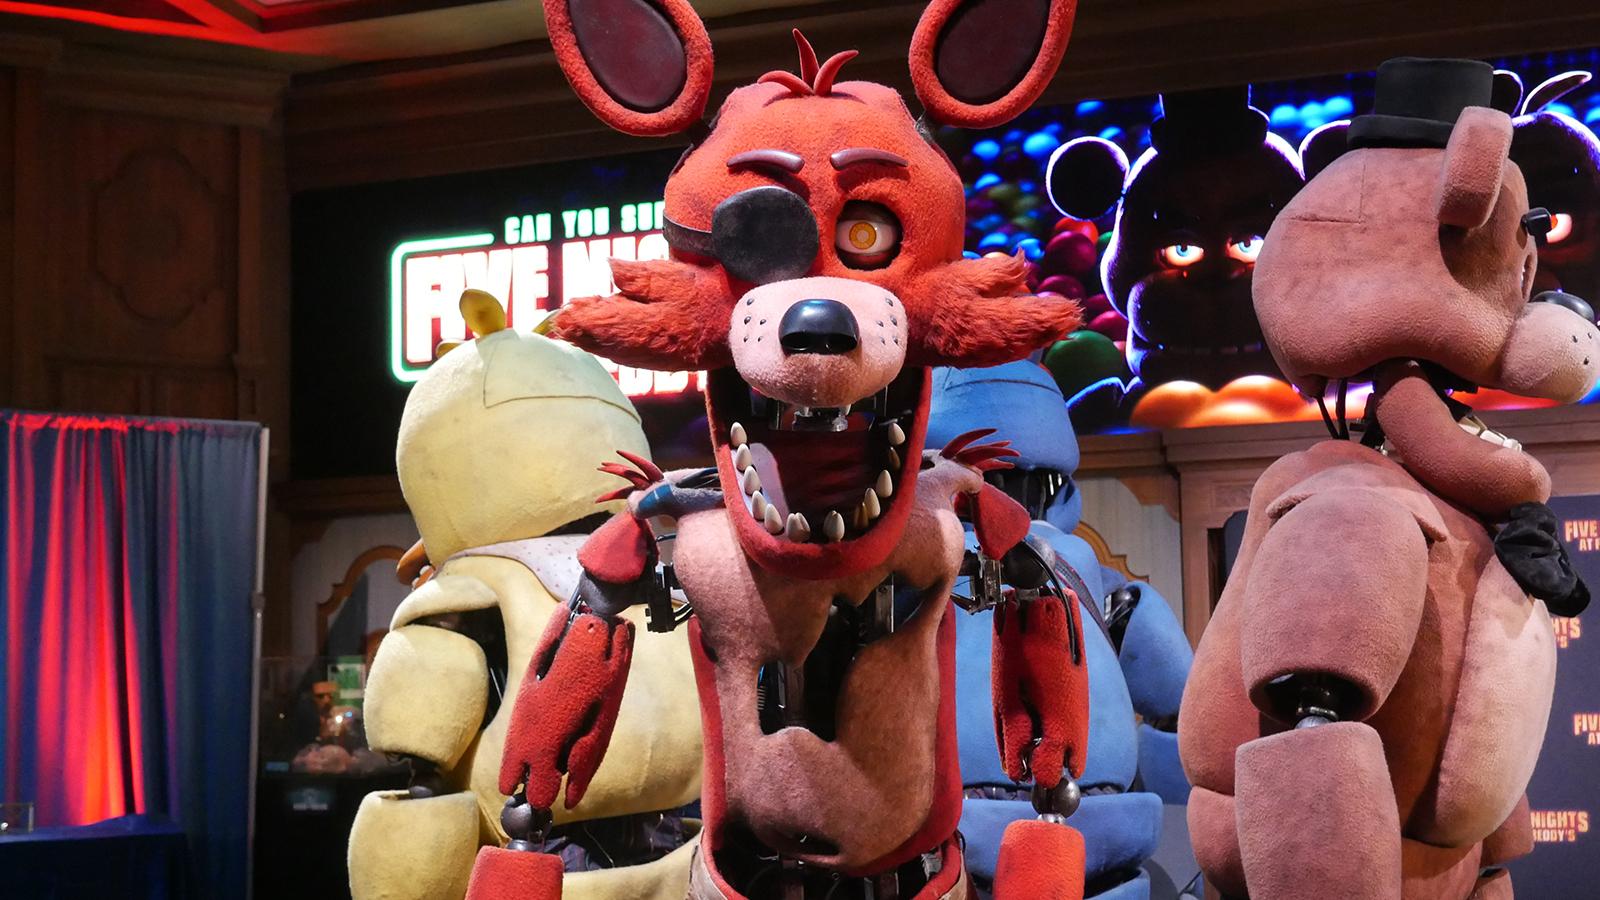 is there a lore reason foxy's sign says it's me? (Credit u